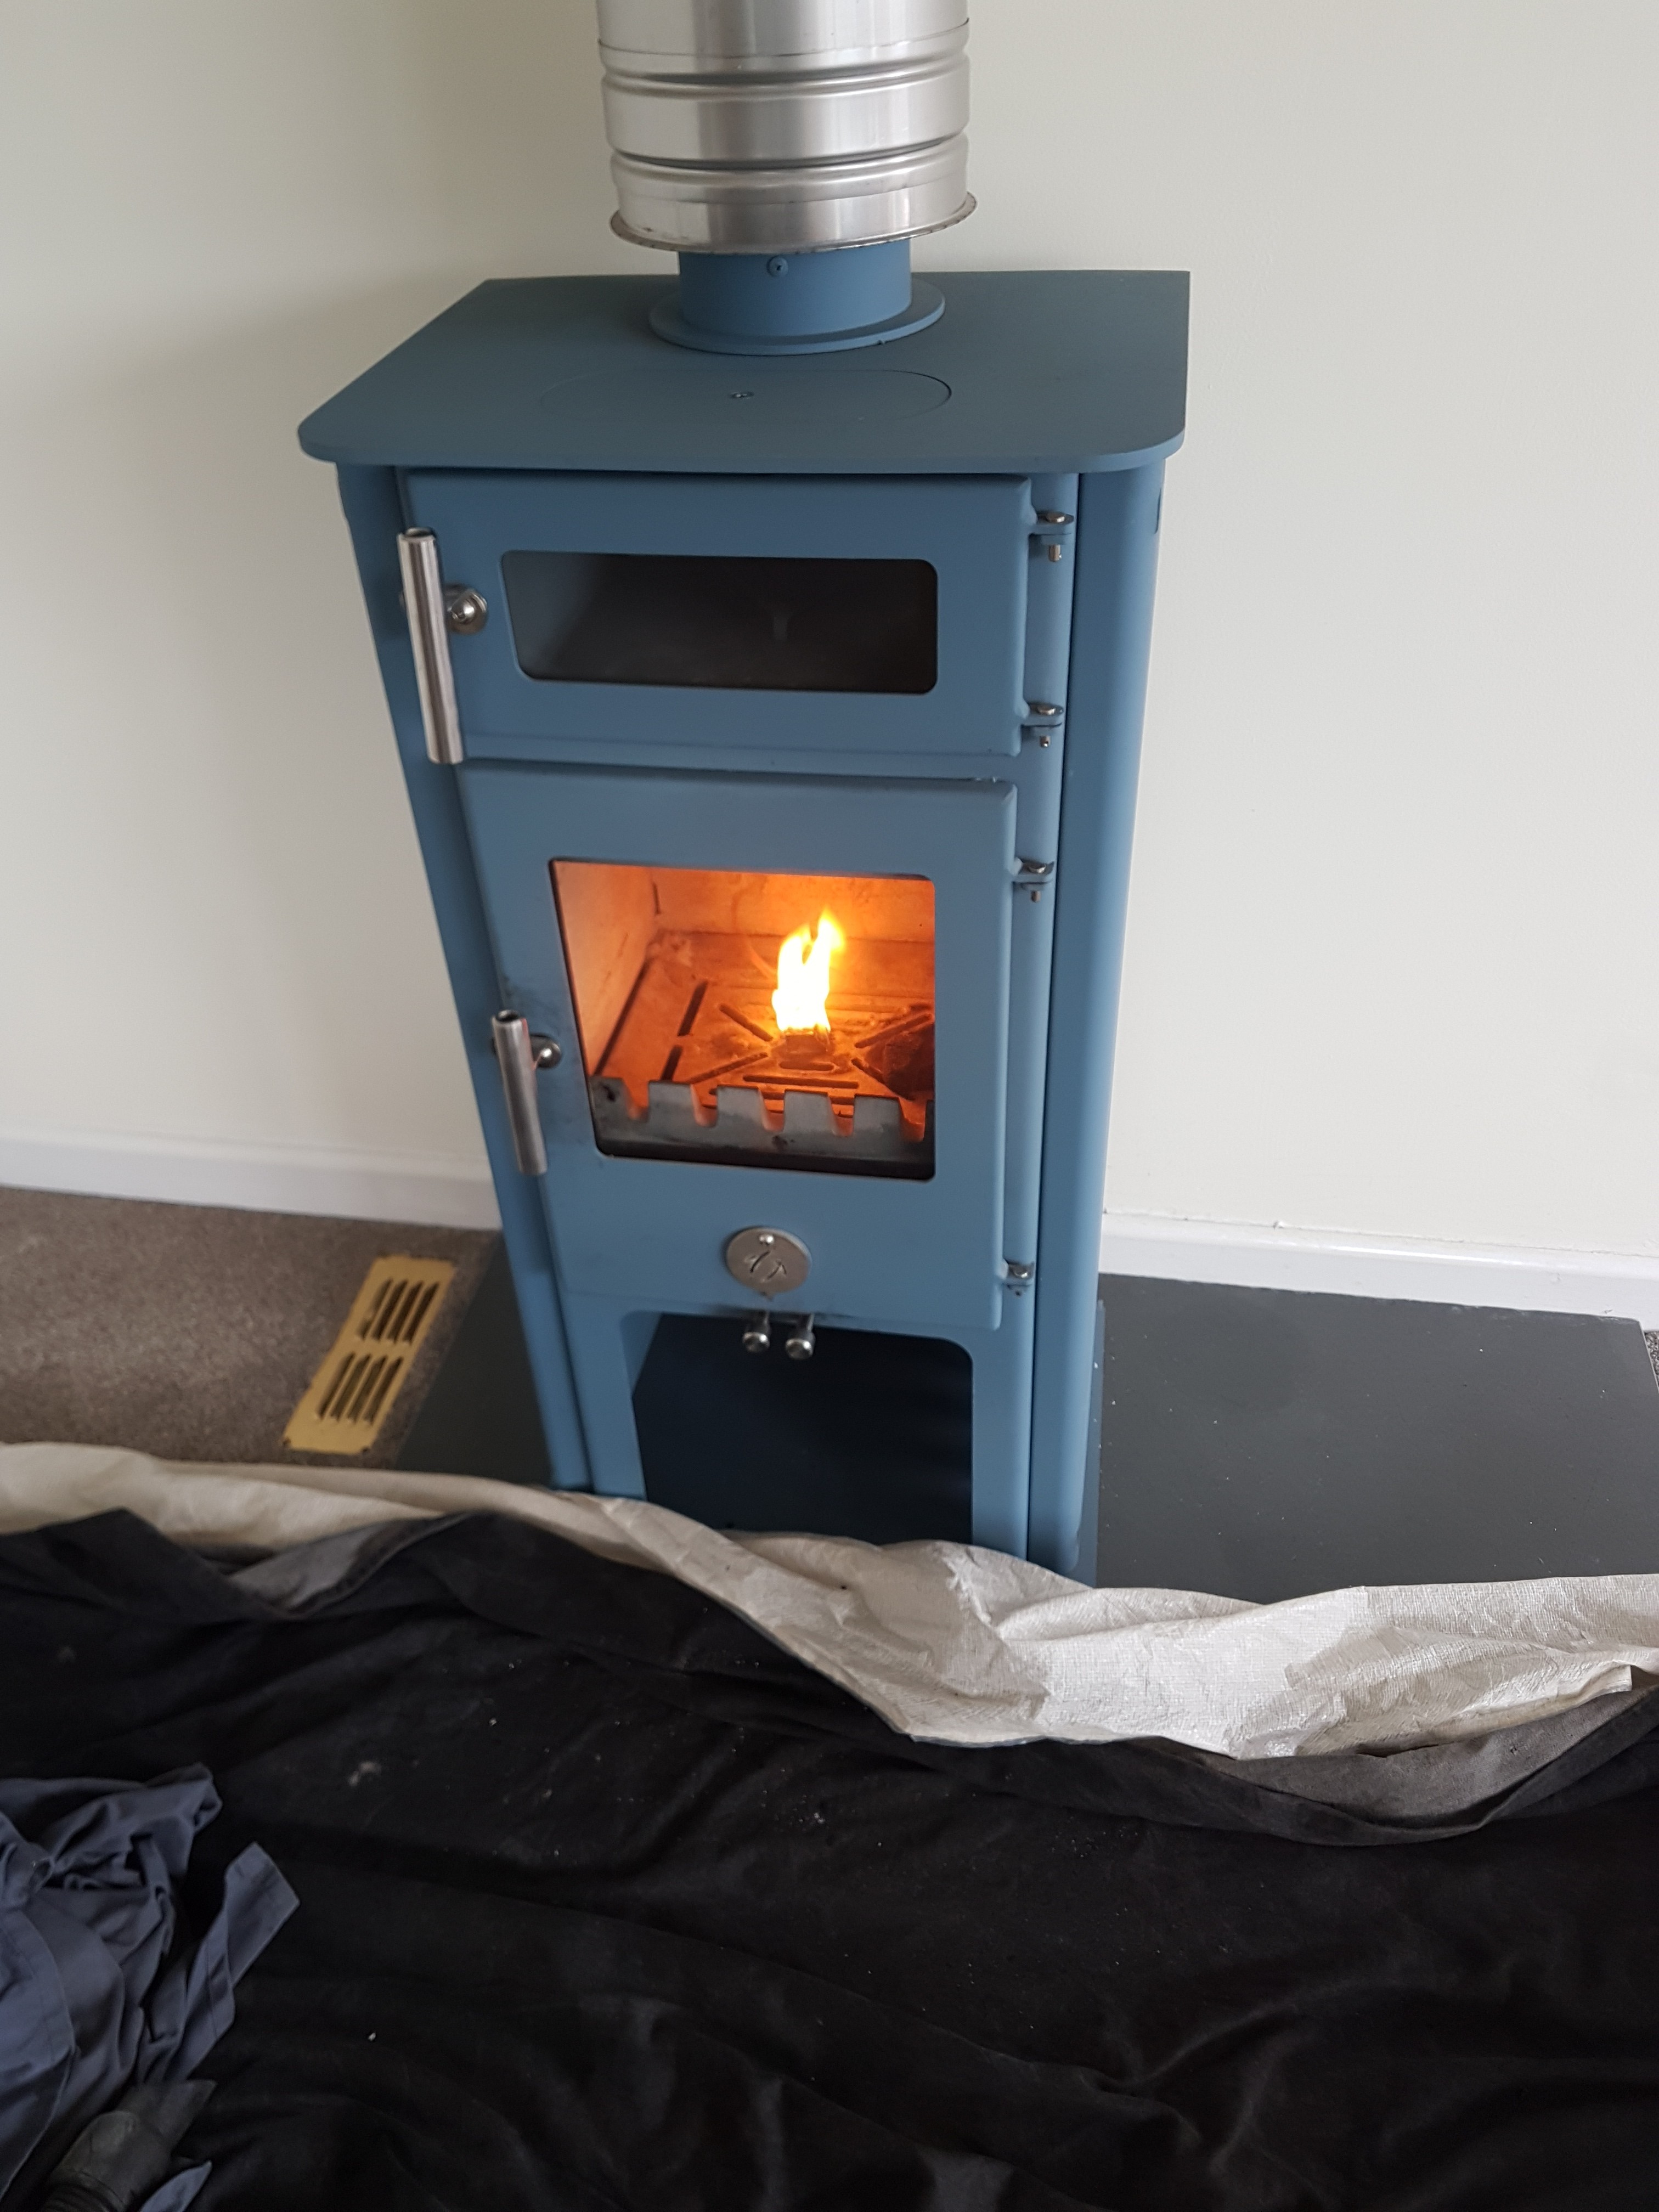 Full service, parts replacement and recomissioning of a Chilli Penguin Woodburner by Hodgsons Chimney Sweeps in Paignton